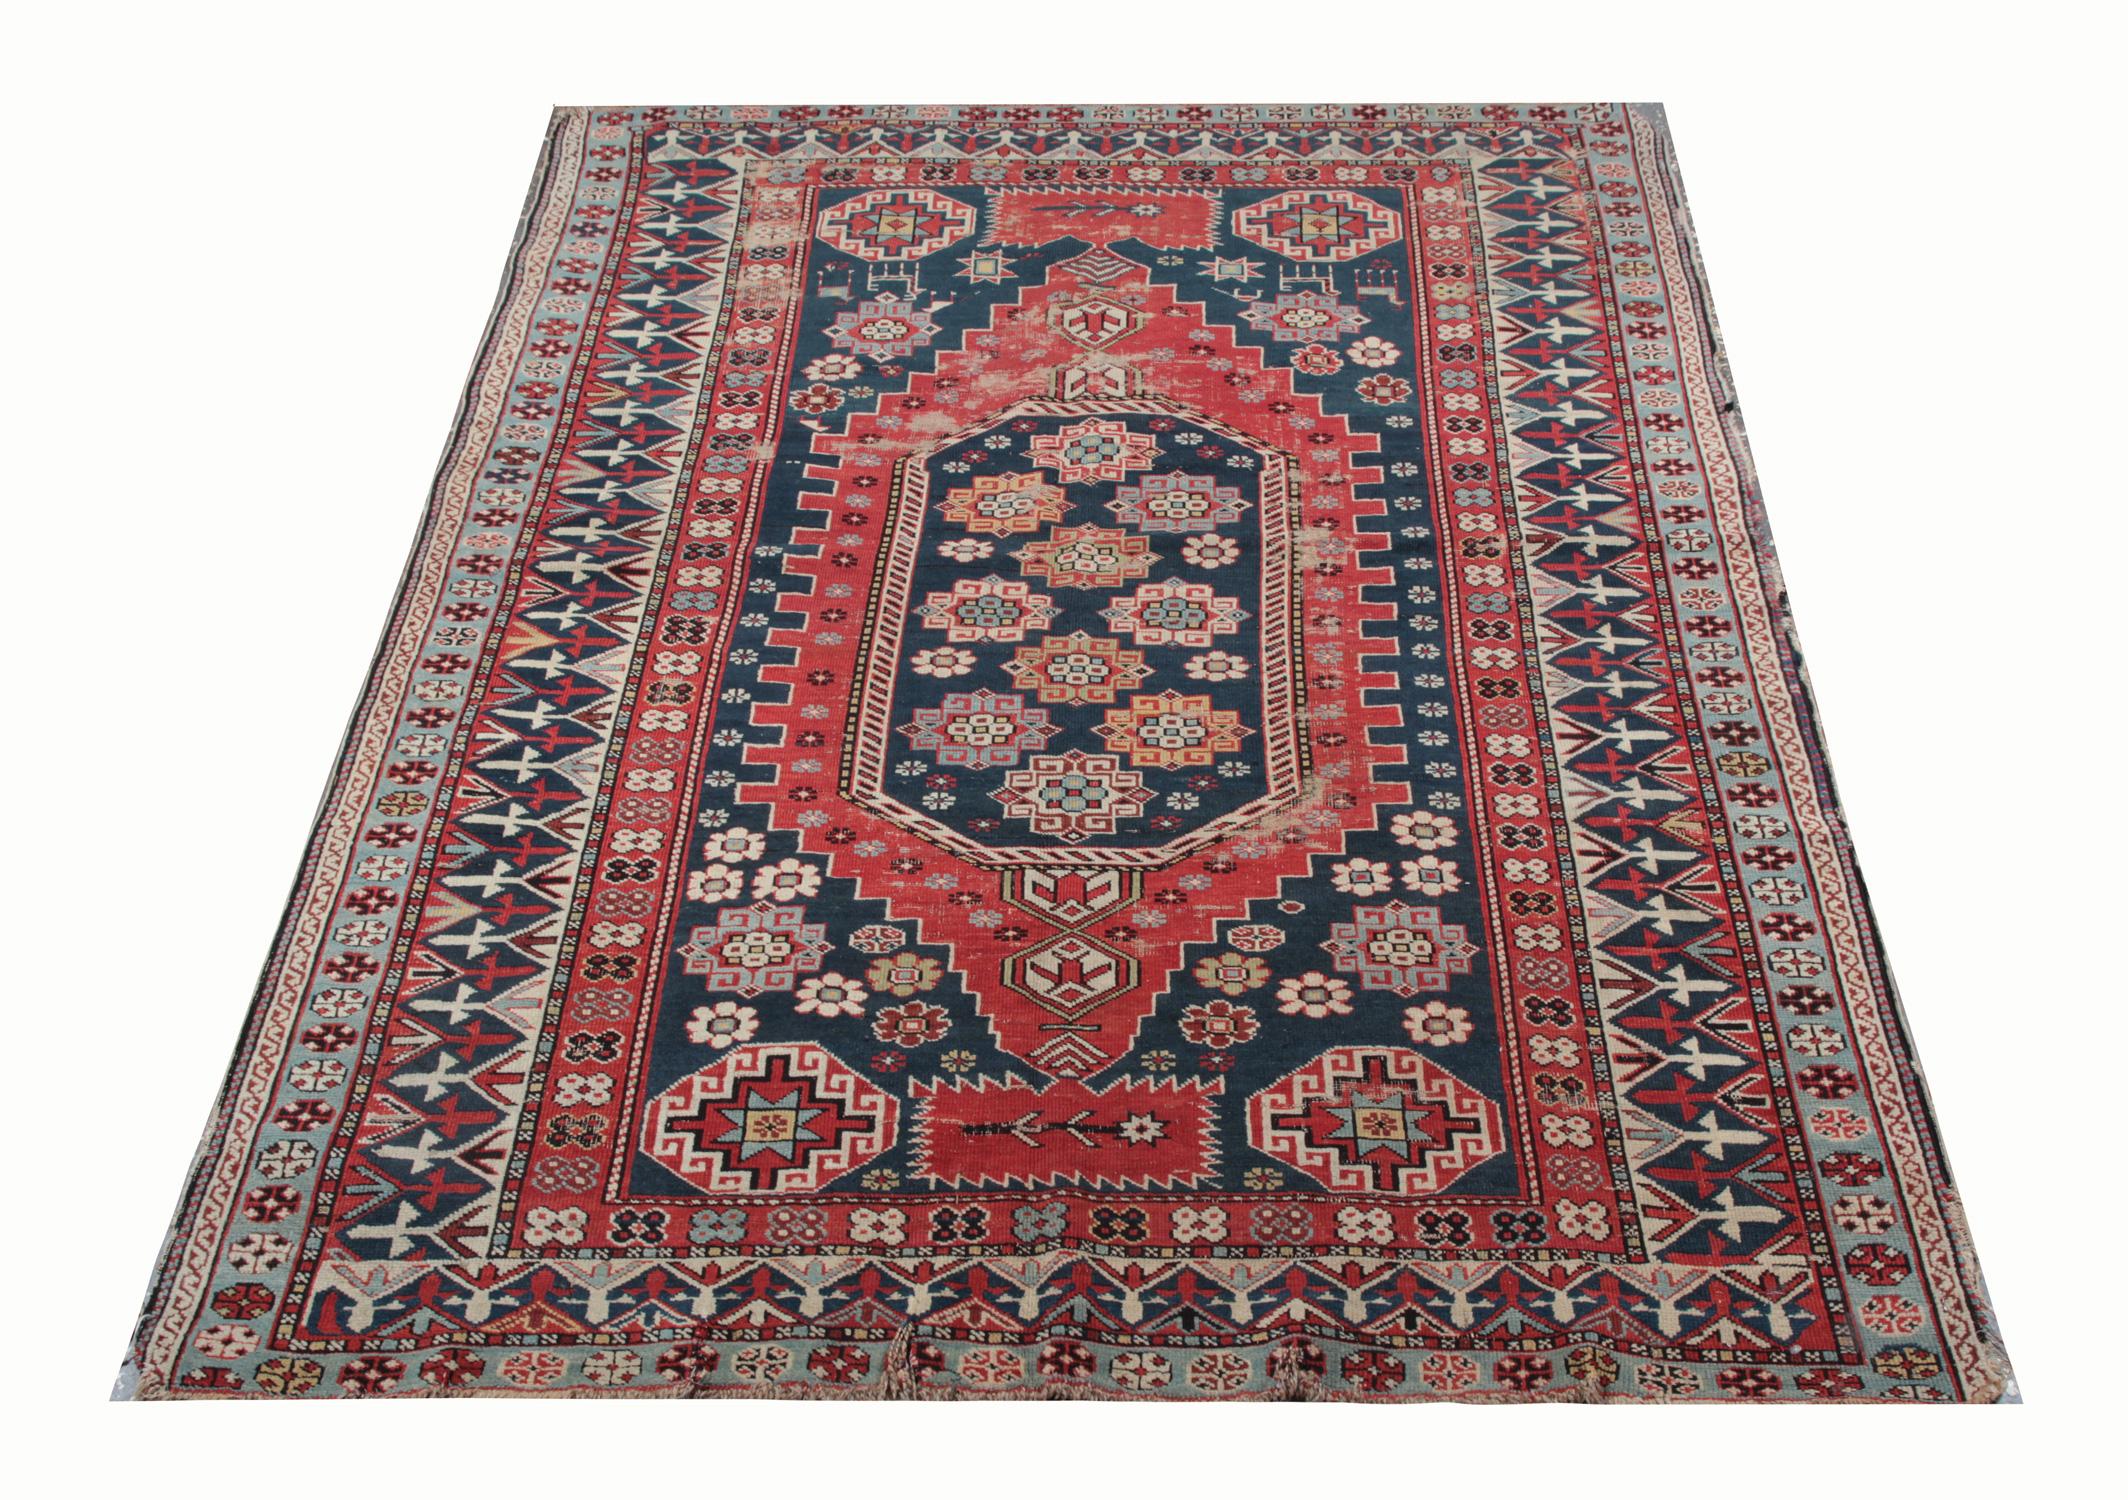 An excellent example of Caucasian carpet rug weaving from the Shirvan region. Though these orange-red ground Central Medallion patterned rugs may seem like from a distance, but this woven rug has a great range of colours. This geometric rug has a